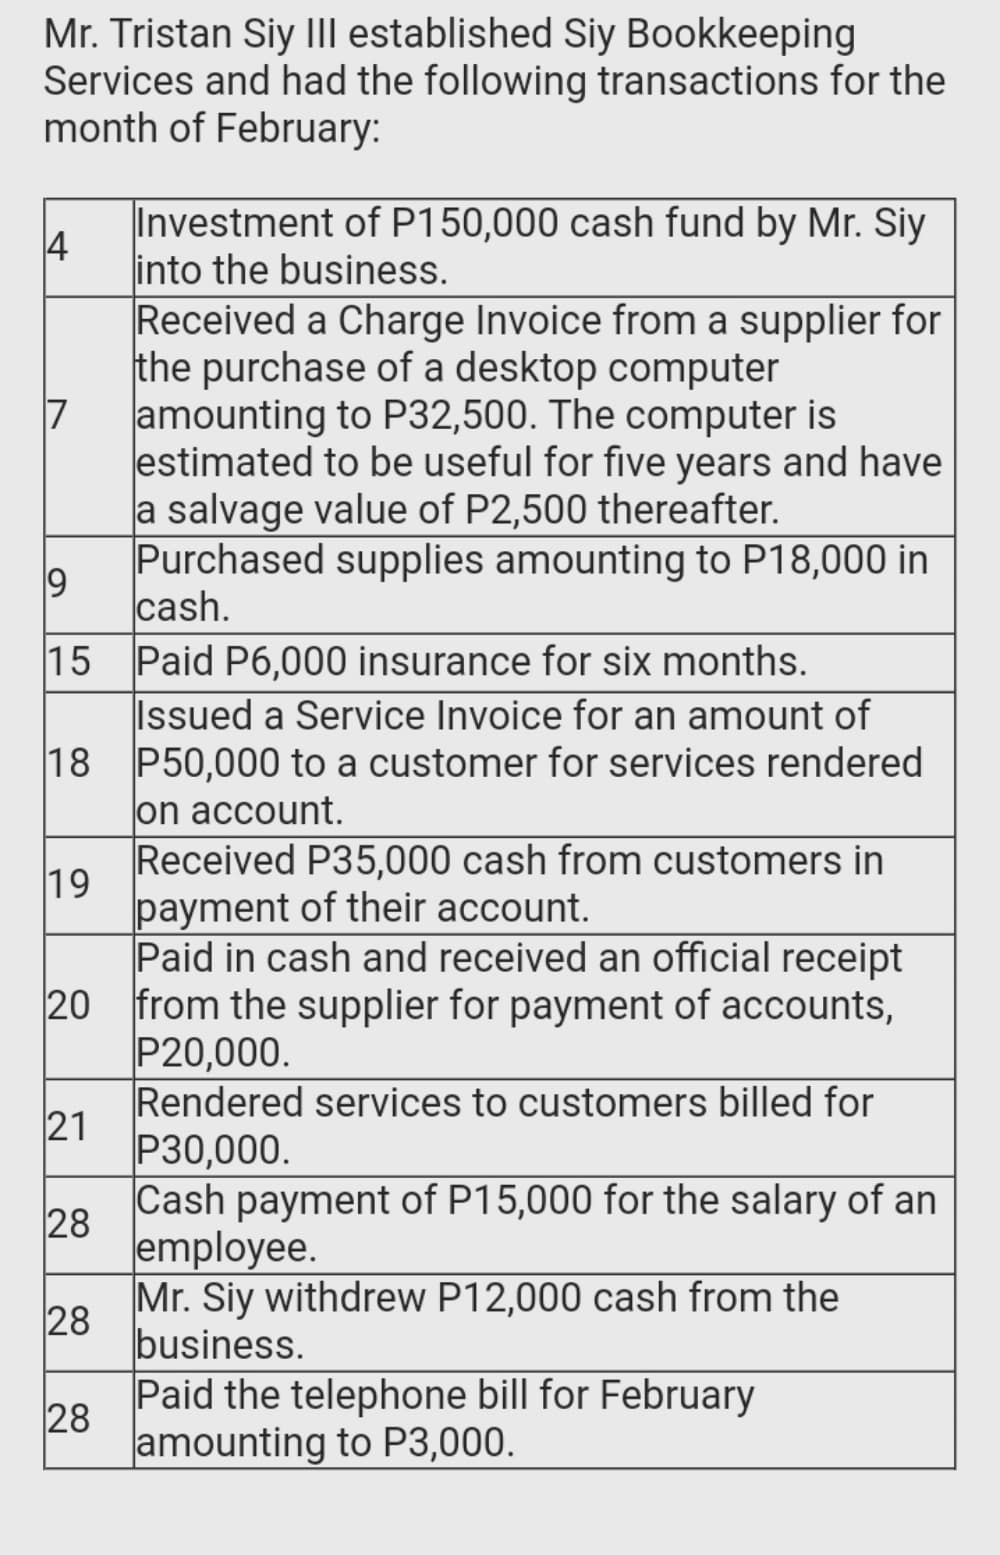 Mr. Tristan Siy III established Siy Bookkeeping
Services and had the following transactions for the
month of February:
Investment of P150,000 cash fund by Mr. Siy
4
into the business.
Received a Charge Invoice from a supplier for
the purchase of a desktop computer
7
amounting to P32,500. The computer is
estimated to be useful for five years and have
a salvage value of P2,500 thereafter.
Purchased supplies amounting to P18,000 in
cash.
15 Paid P6,000 insurance for six months.
Issued a Service Invoice for an amount of
P50,000 to a customer for services rendered
on account.
Received P35,000 cash from customers in
19
payment of their account.
Paid in cash and received an official receipt
20
from the supplier for payment of accounts,
P20,000.
Rendered services to customers billed for
21
P30,000.
Cash payment of P15,000 for the salary of an
28
employee.
Mr. Siy withdrew P12,000 cash from the
28
business.
Paid the telephone bill for February
28
|amounting to P3,000.
